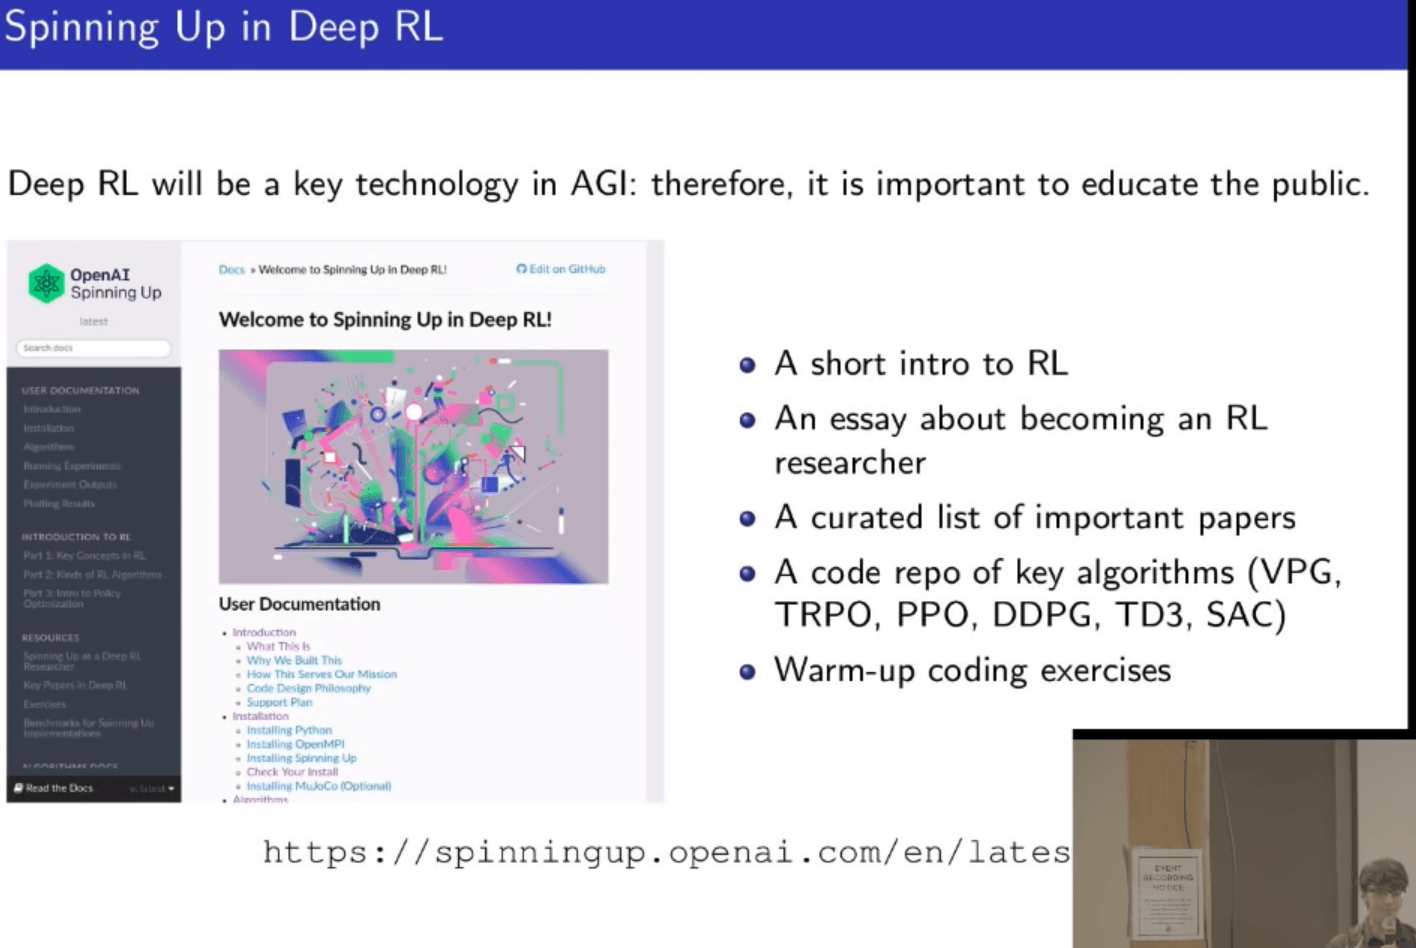 Openai Spinning Up Logo - Data Science, Database, Tools Learning's (Video-Image-Text-Data ...